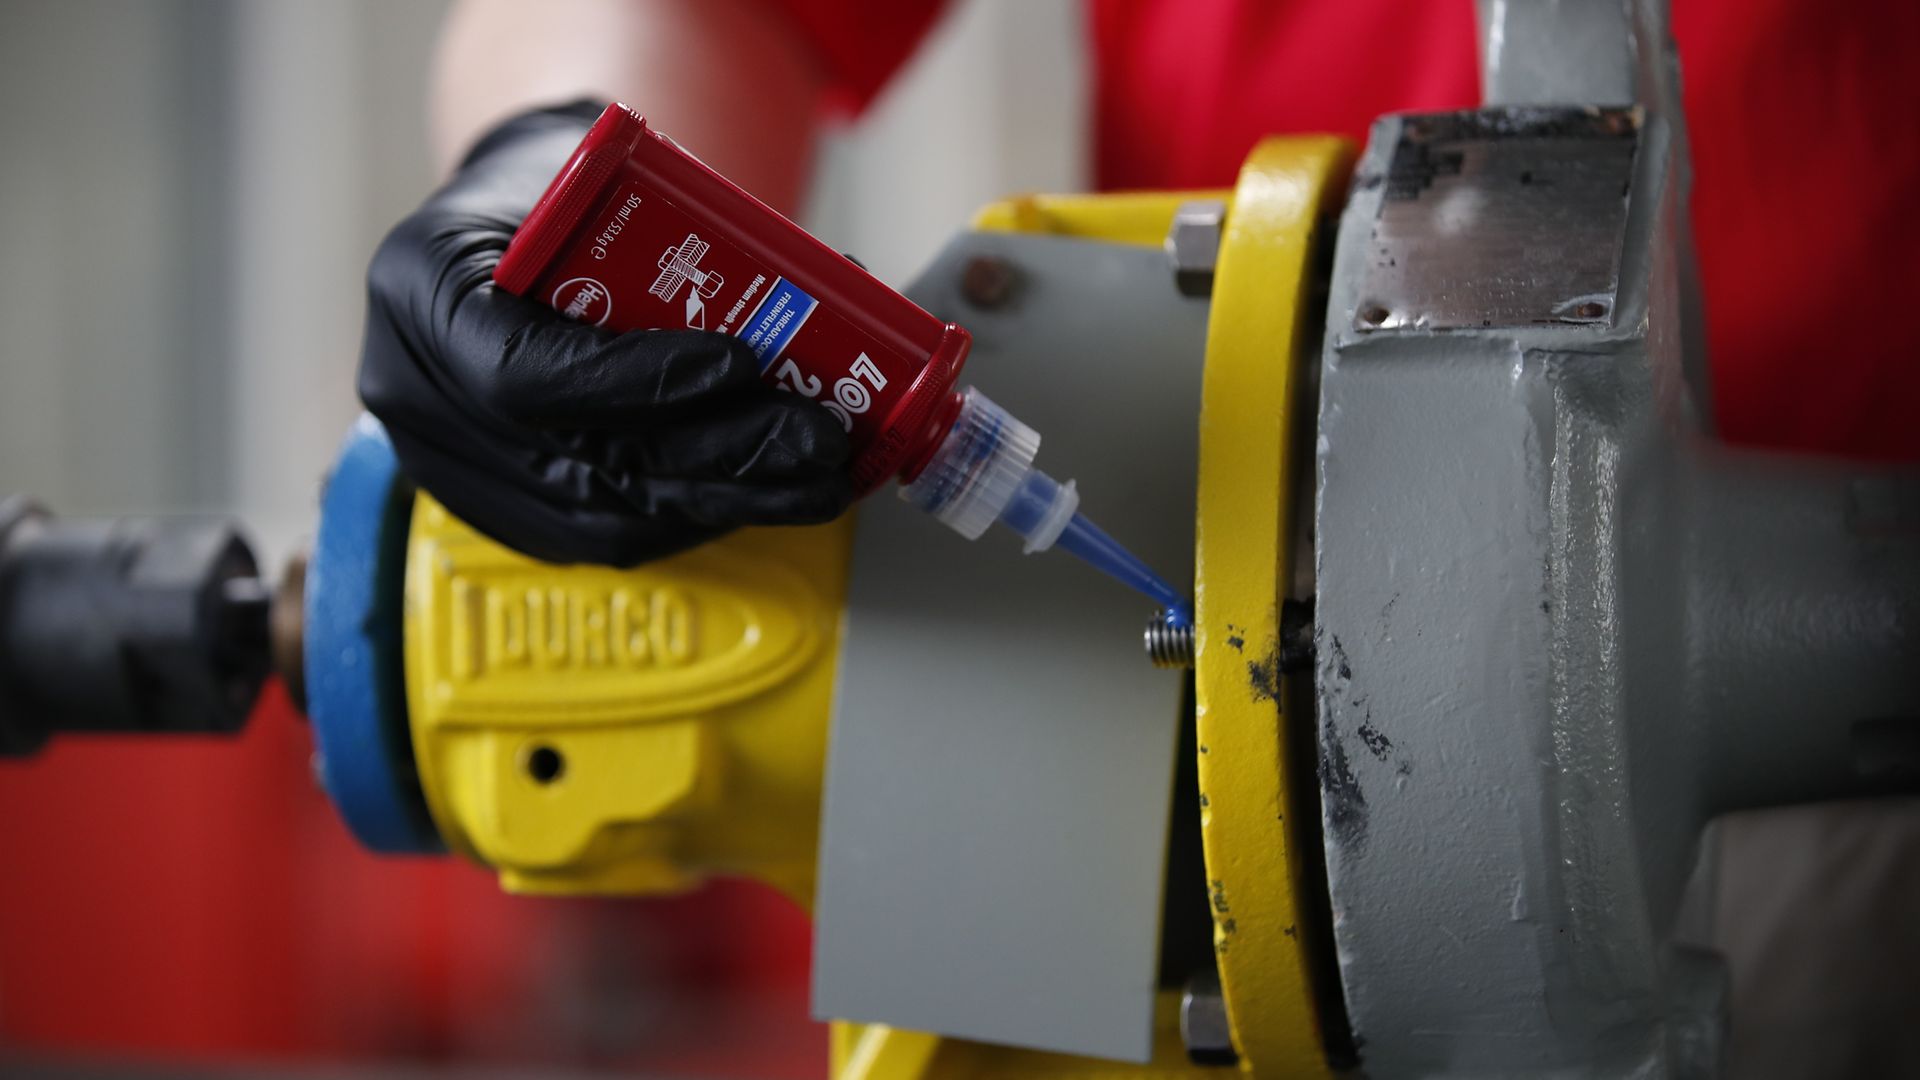 Loctite as an innovative adhesive solution for industry and do-it-yourself applications.